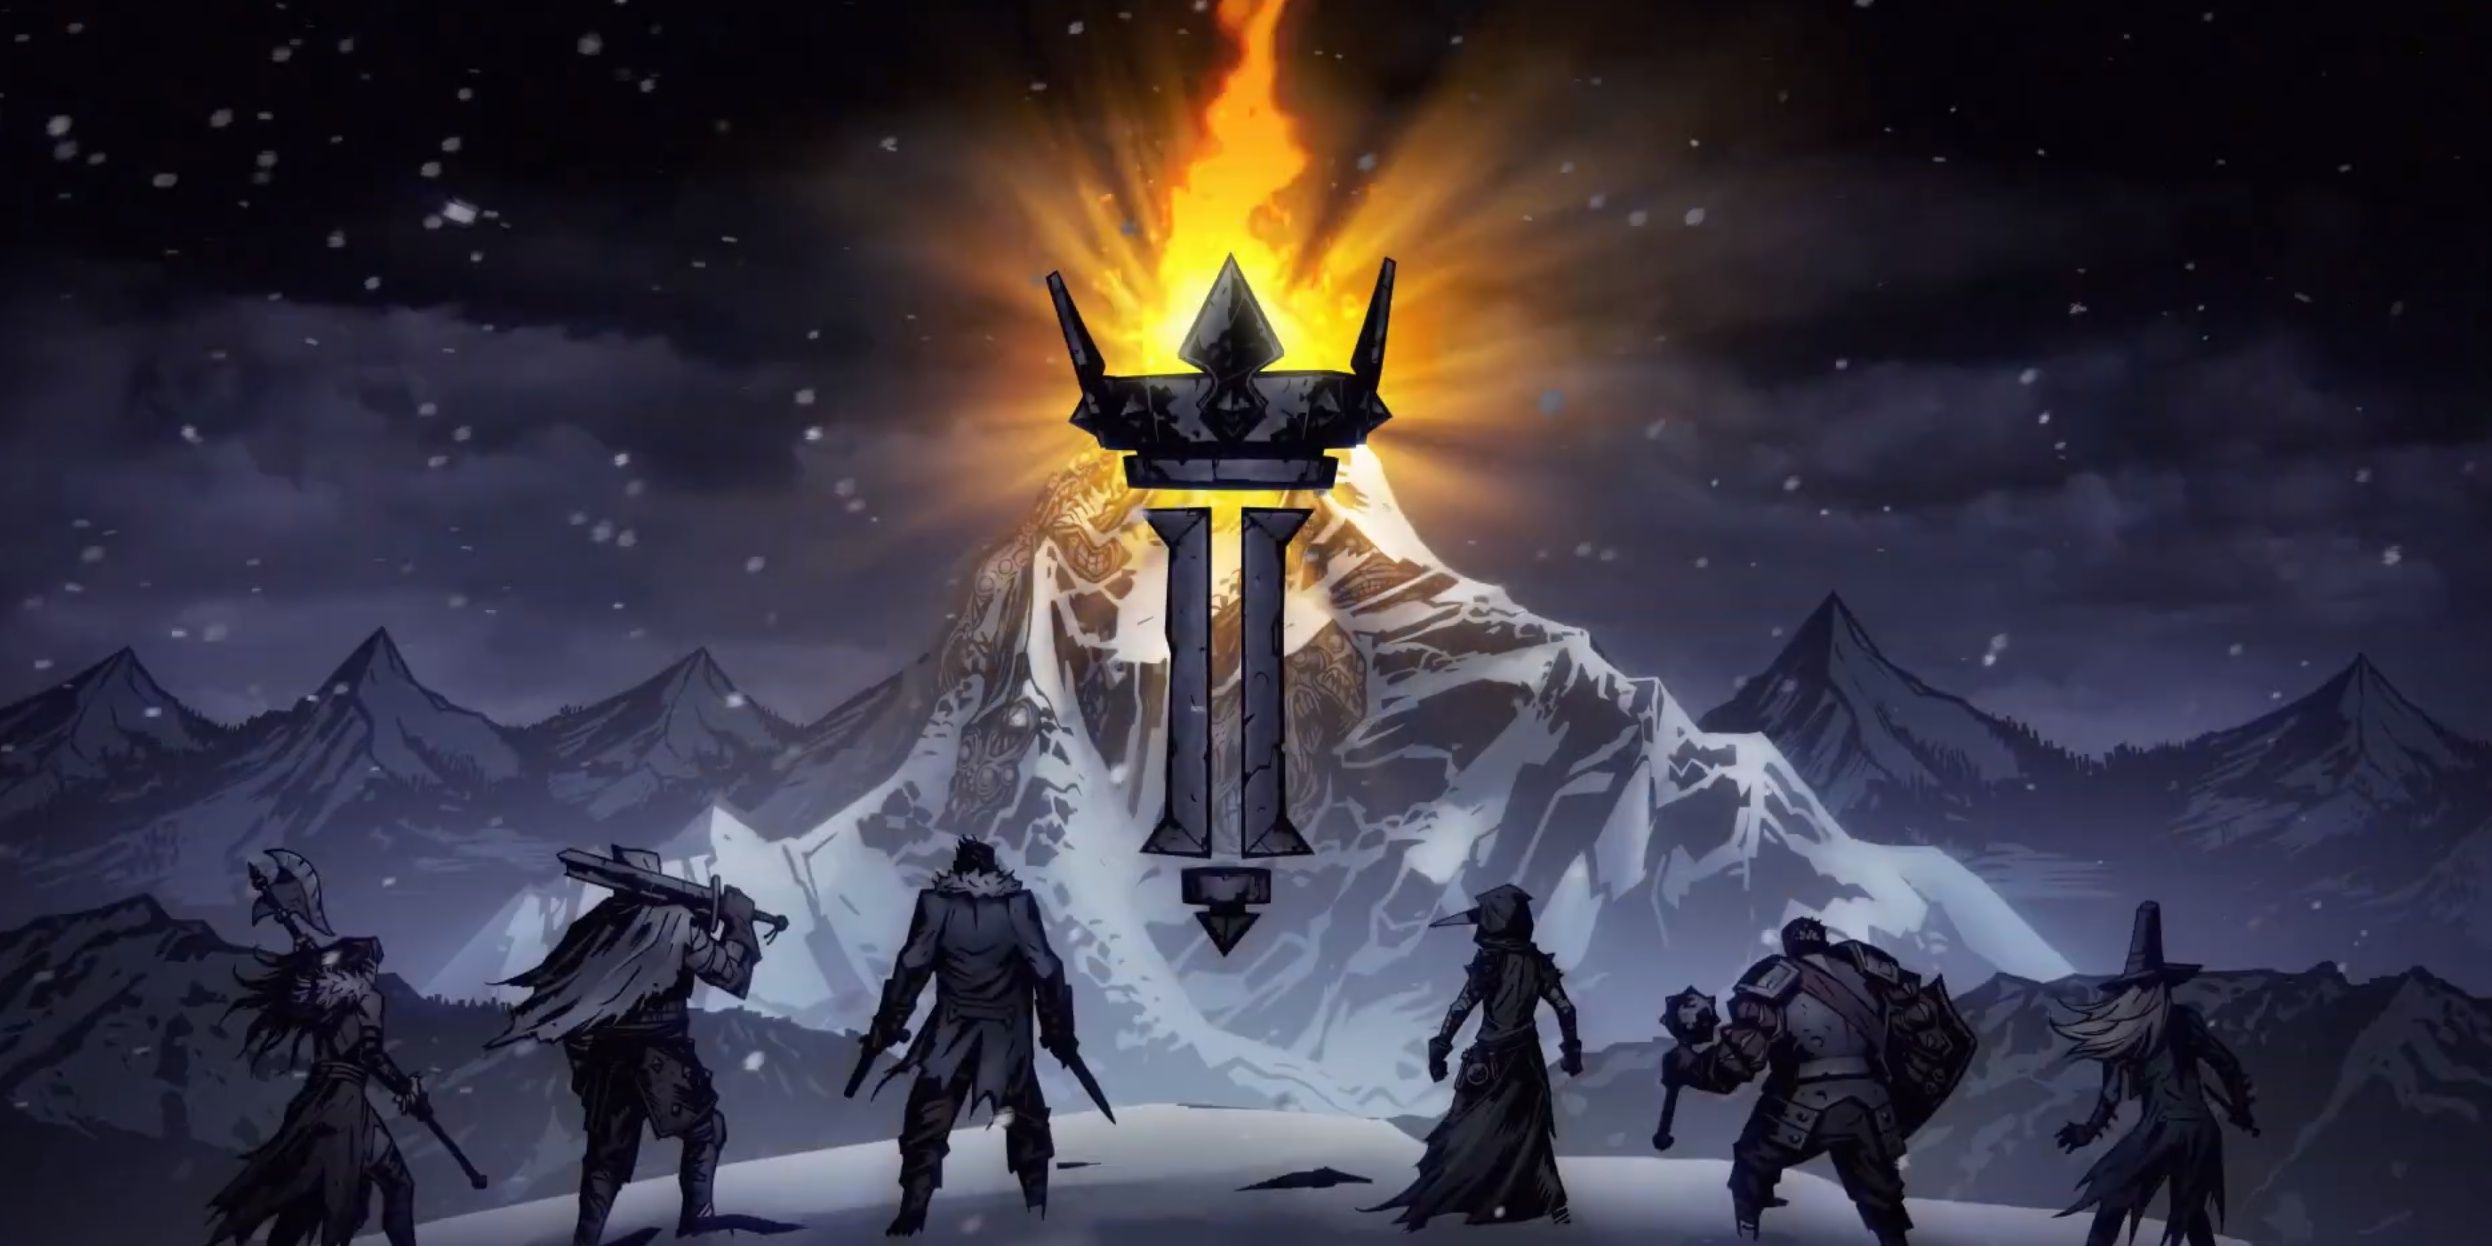 Darkest Dungeon 2 logo - Snowy Mountain Torch with party members facing mountain